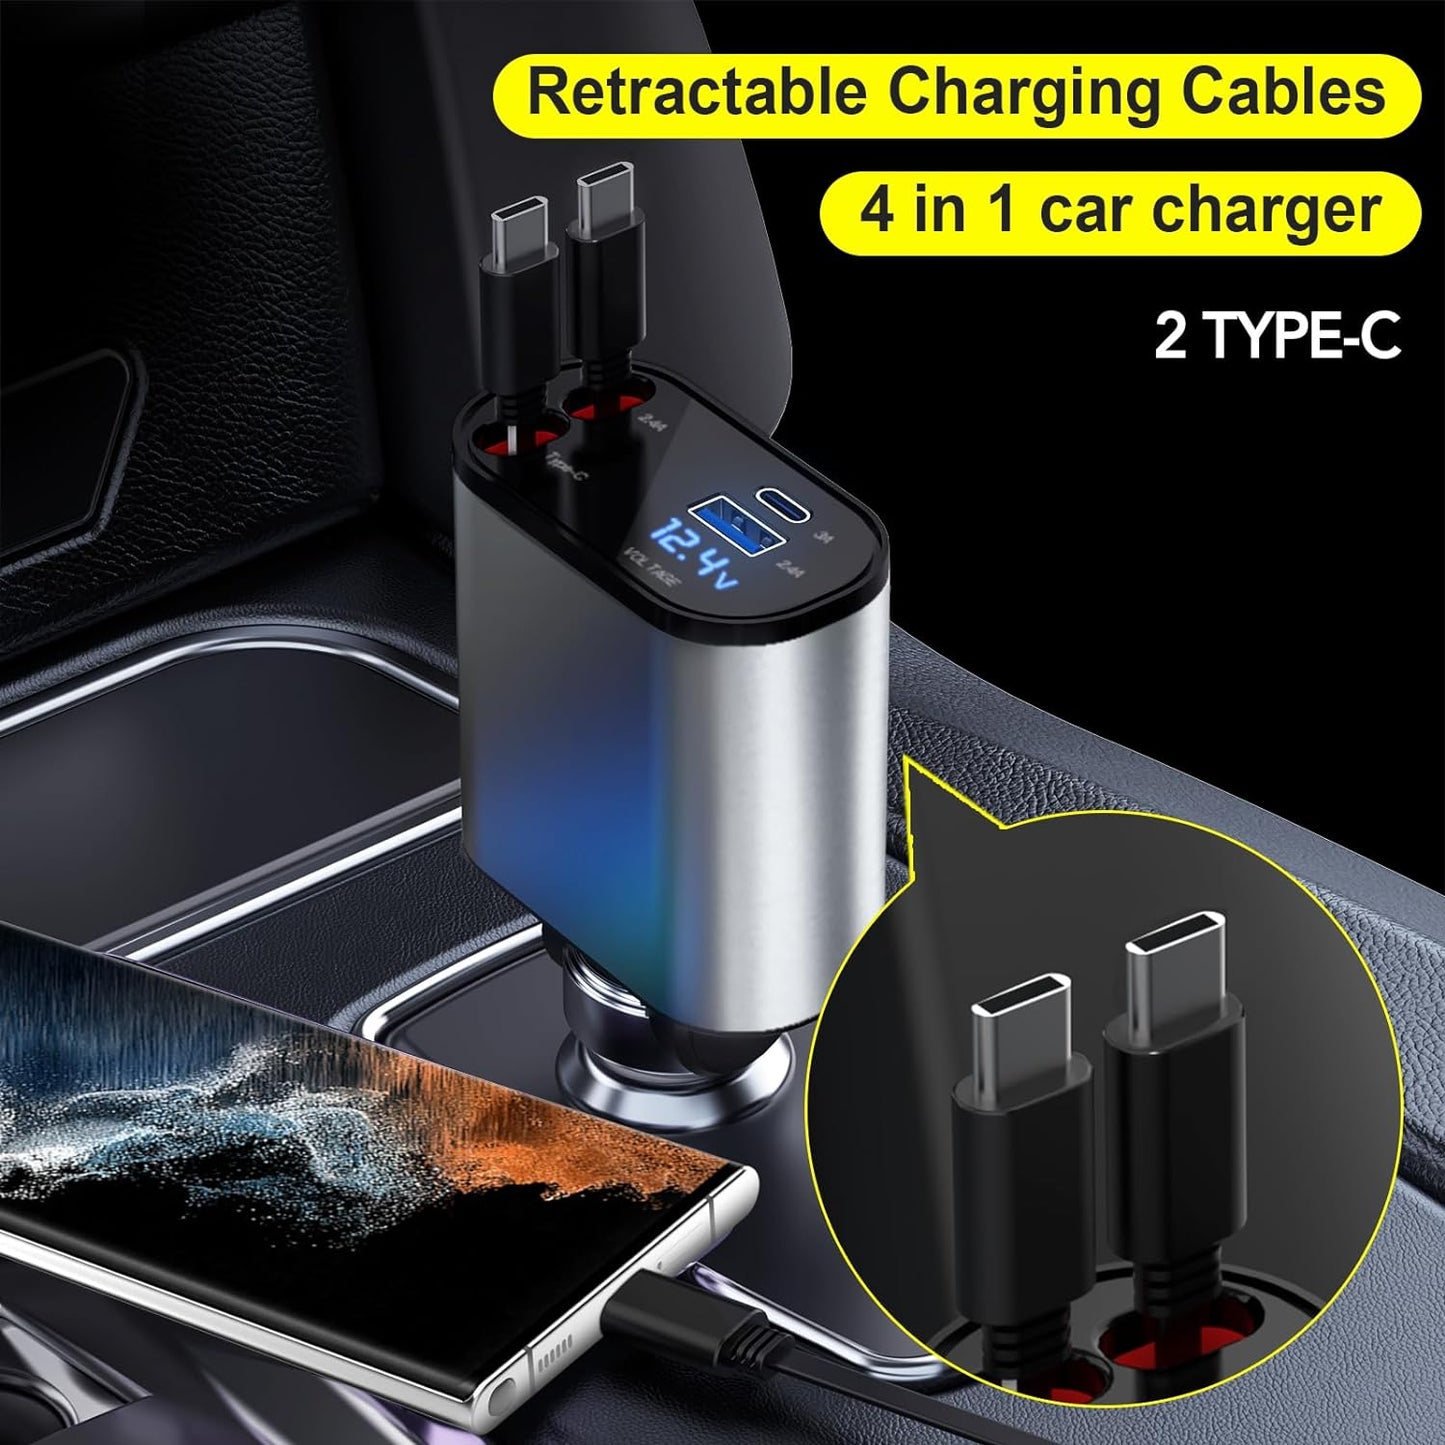 Retractable Car Charger, 4 in 1 Fast Car Phone Charger 60W, Retractable Cables and USB Car Charger,Compatible with iPhone 15/14/13/12/11,Galaxy,Pixel.Travel/Portable.Car accessories.For gifts